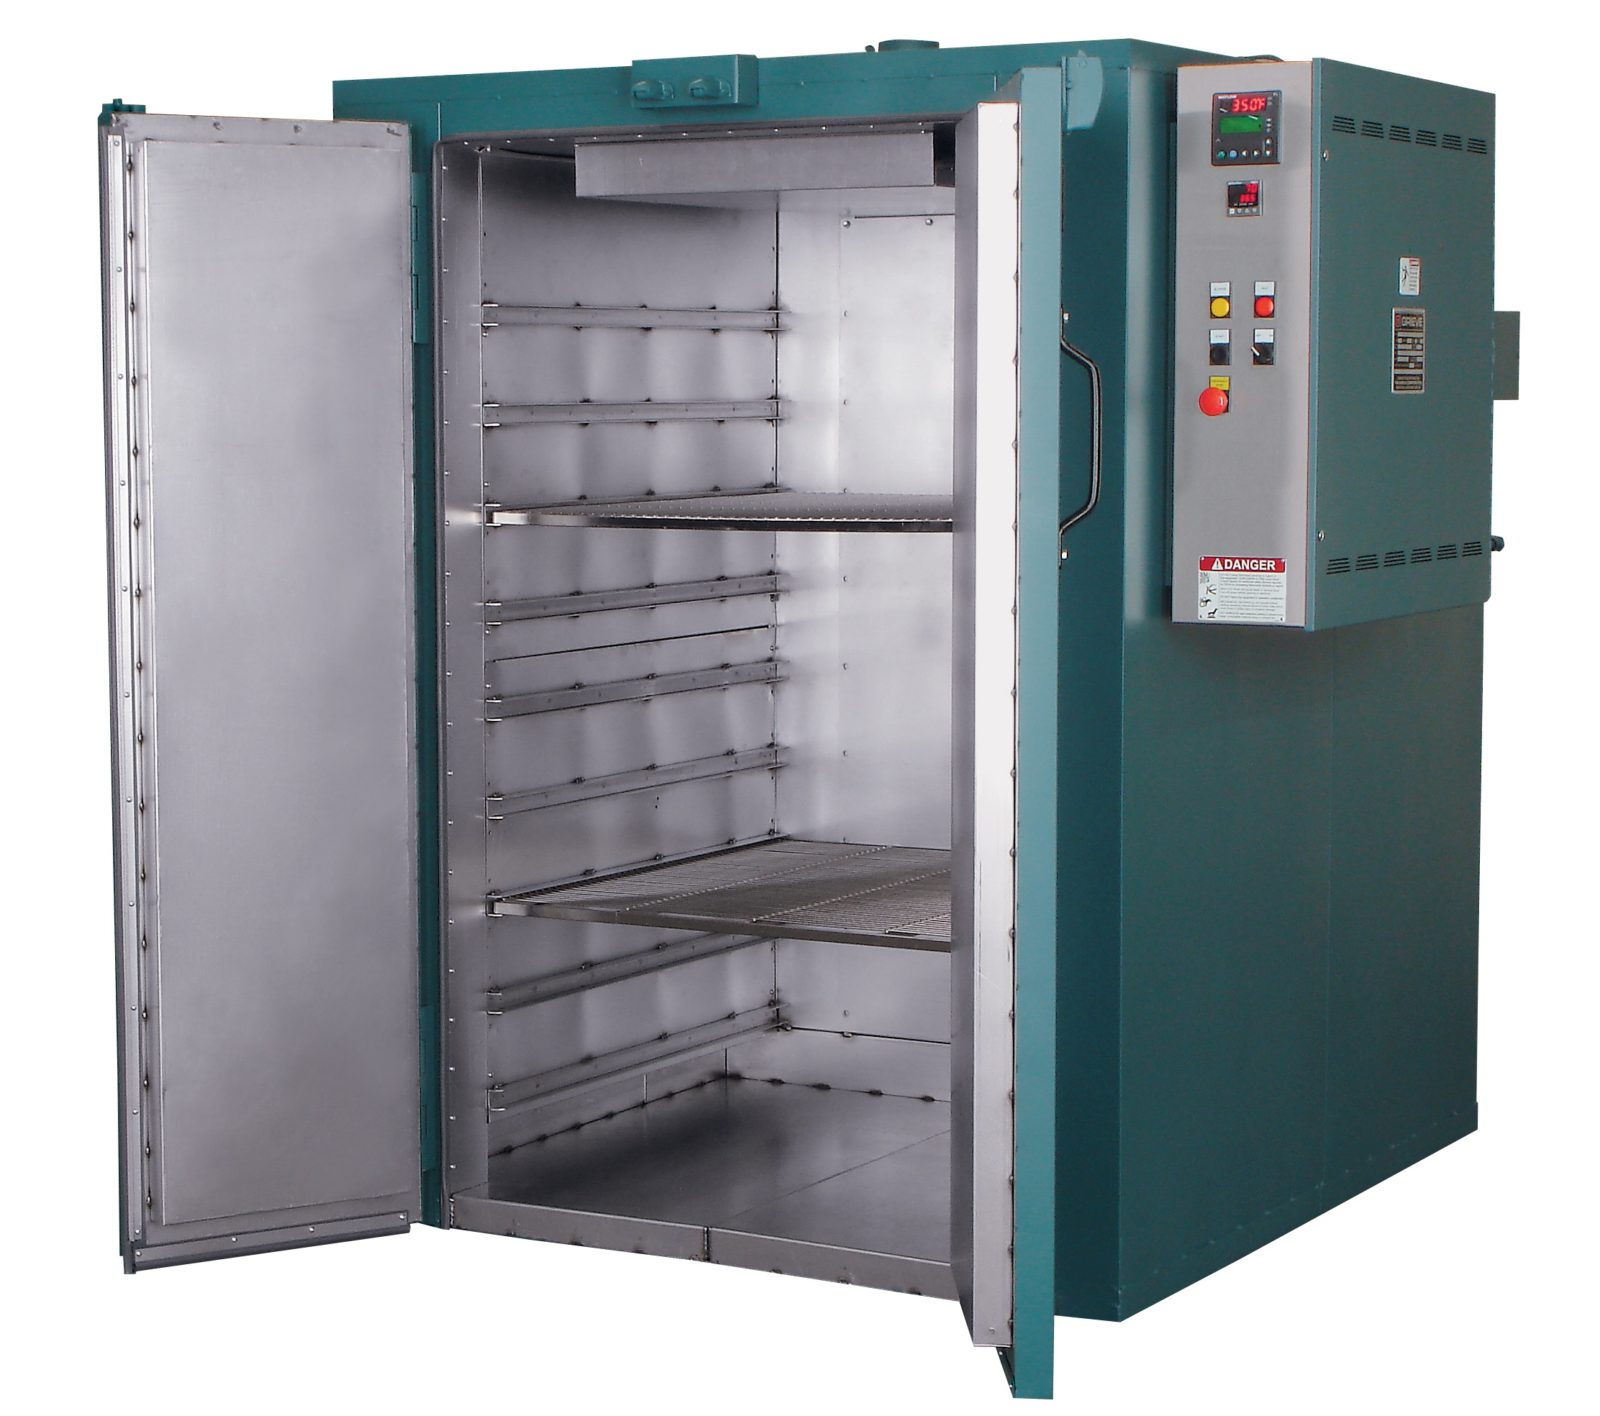 https://www.grievecorp.com/wp-content/uploads/2019/12/floor-level-cabinet-oven-1-NO-TEXT-CA430-scaled.jpg